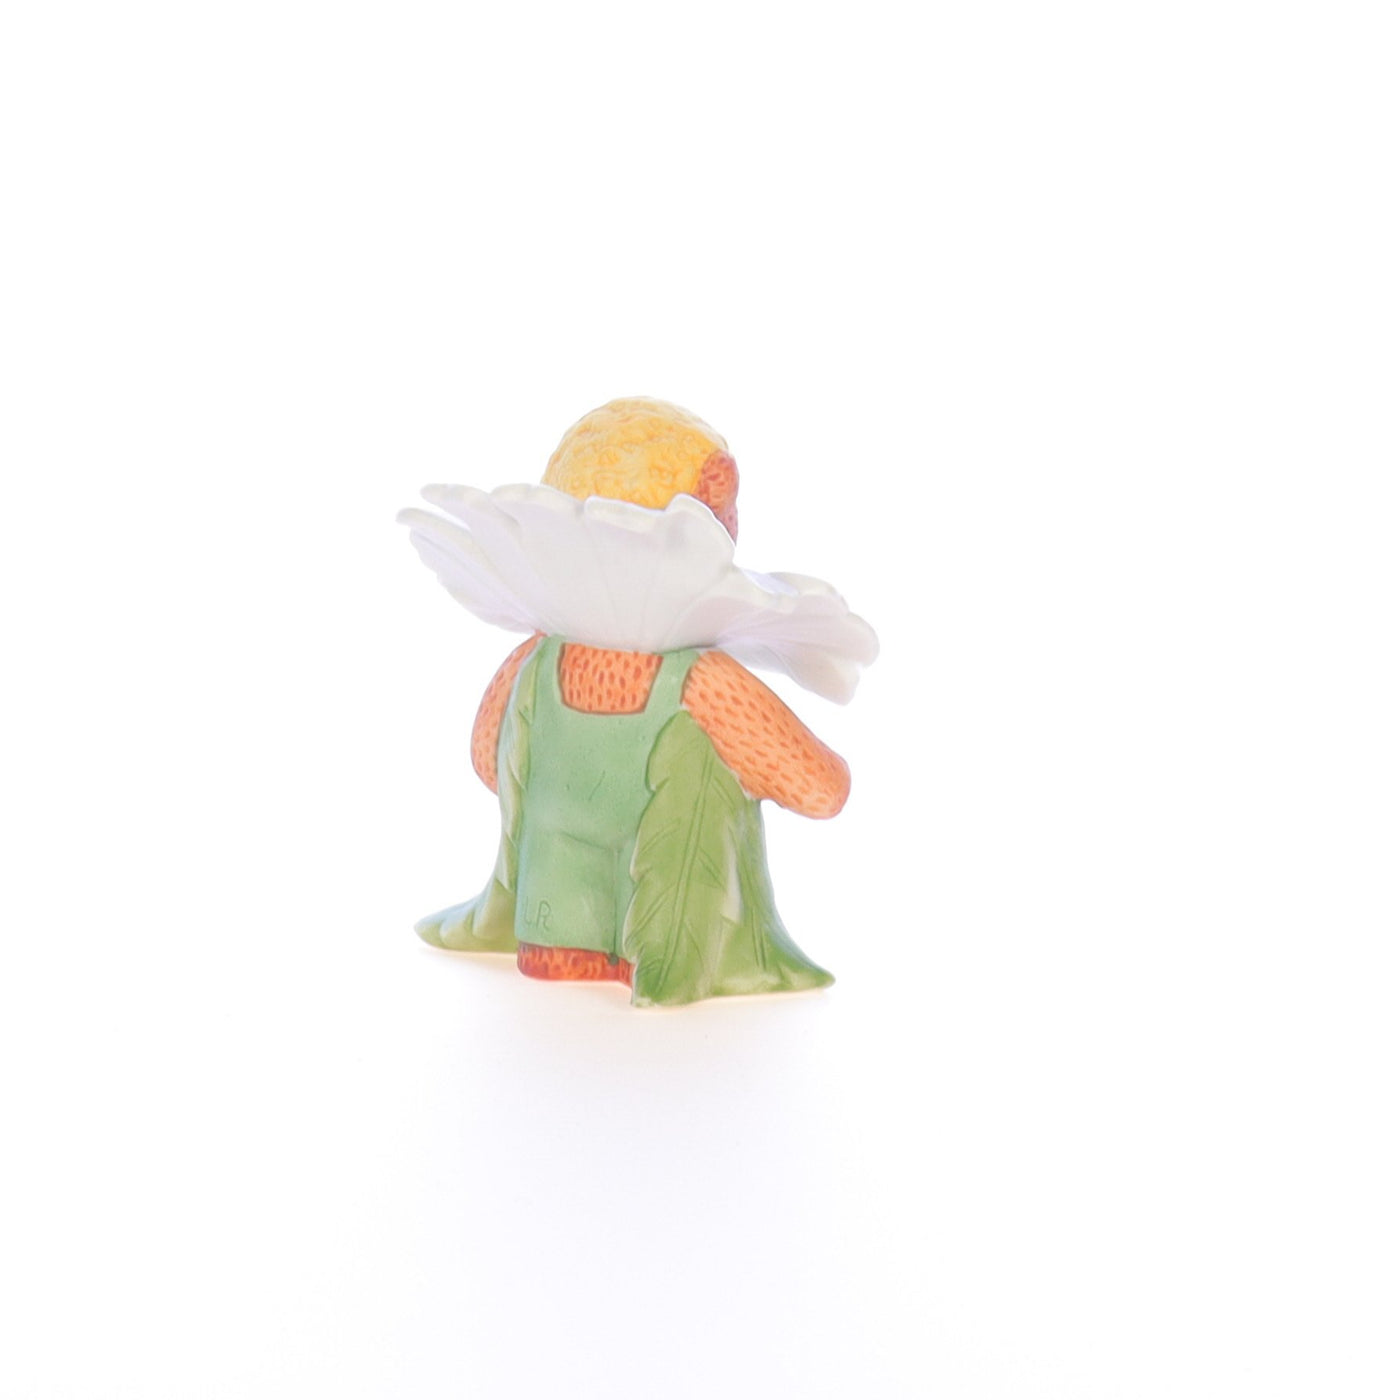 Lucy_And_Me_by_Lucy_Atwell_Porcelain_Figurine_1989_Flower_Petals_Lucy_Unknown_004_06